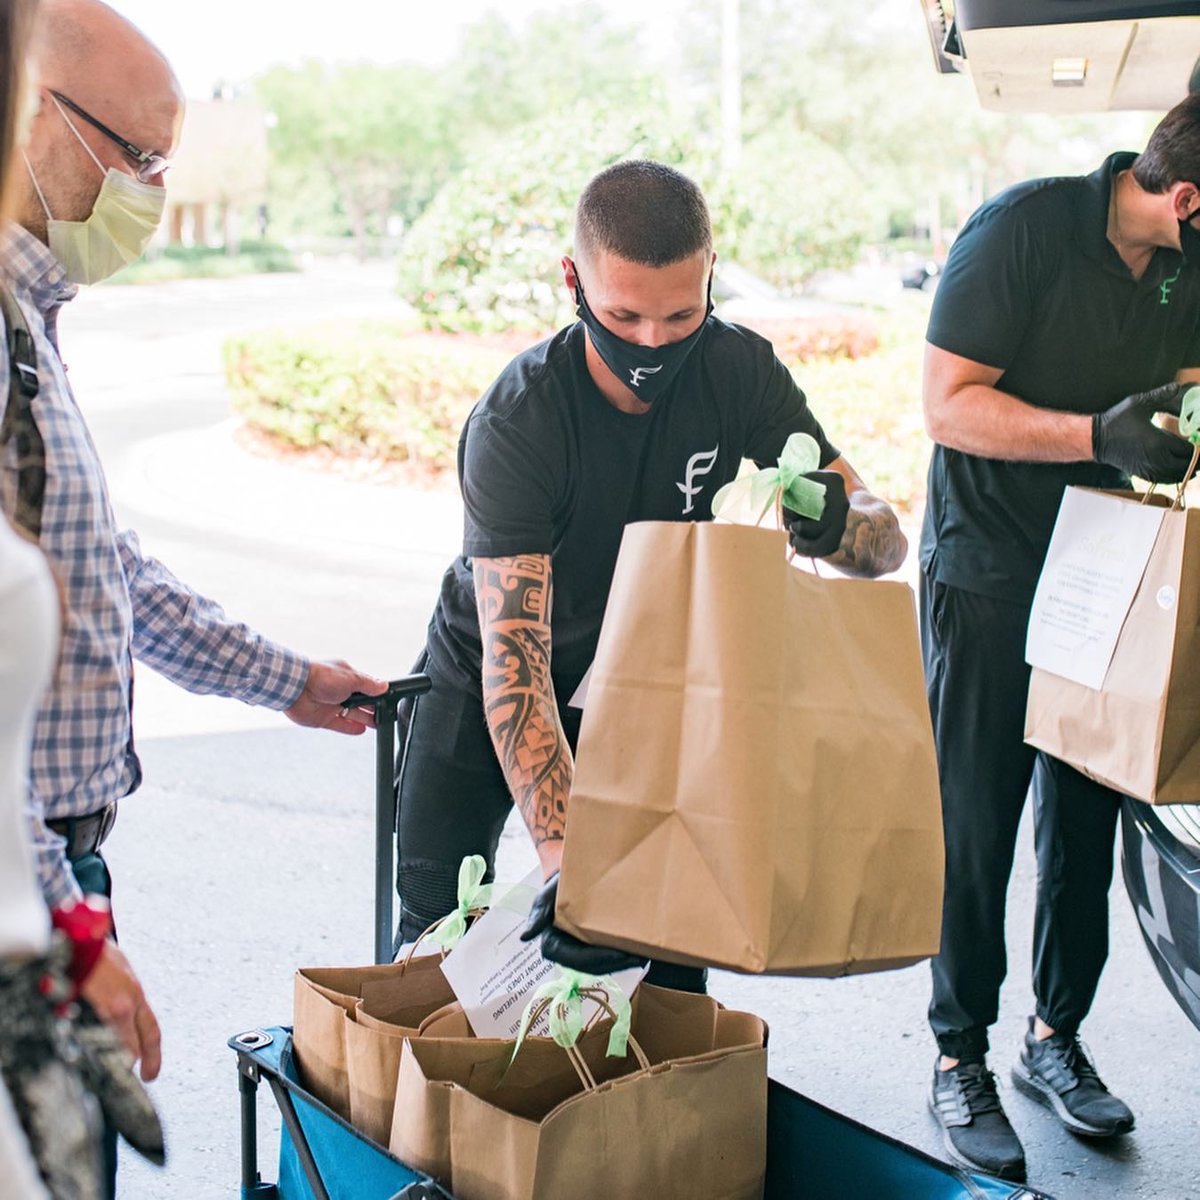 Our heroes @AdventHealth in Tampa Bay recently received 50 meals from @welovesofresh thanks to our partners @TheFueling. Our Tampa Bay team has donated over 4,000 meals so far and they're just getting started. To donate, visit frontlinefoods.org/tampa-bay #frontlinefoods